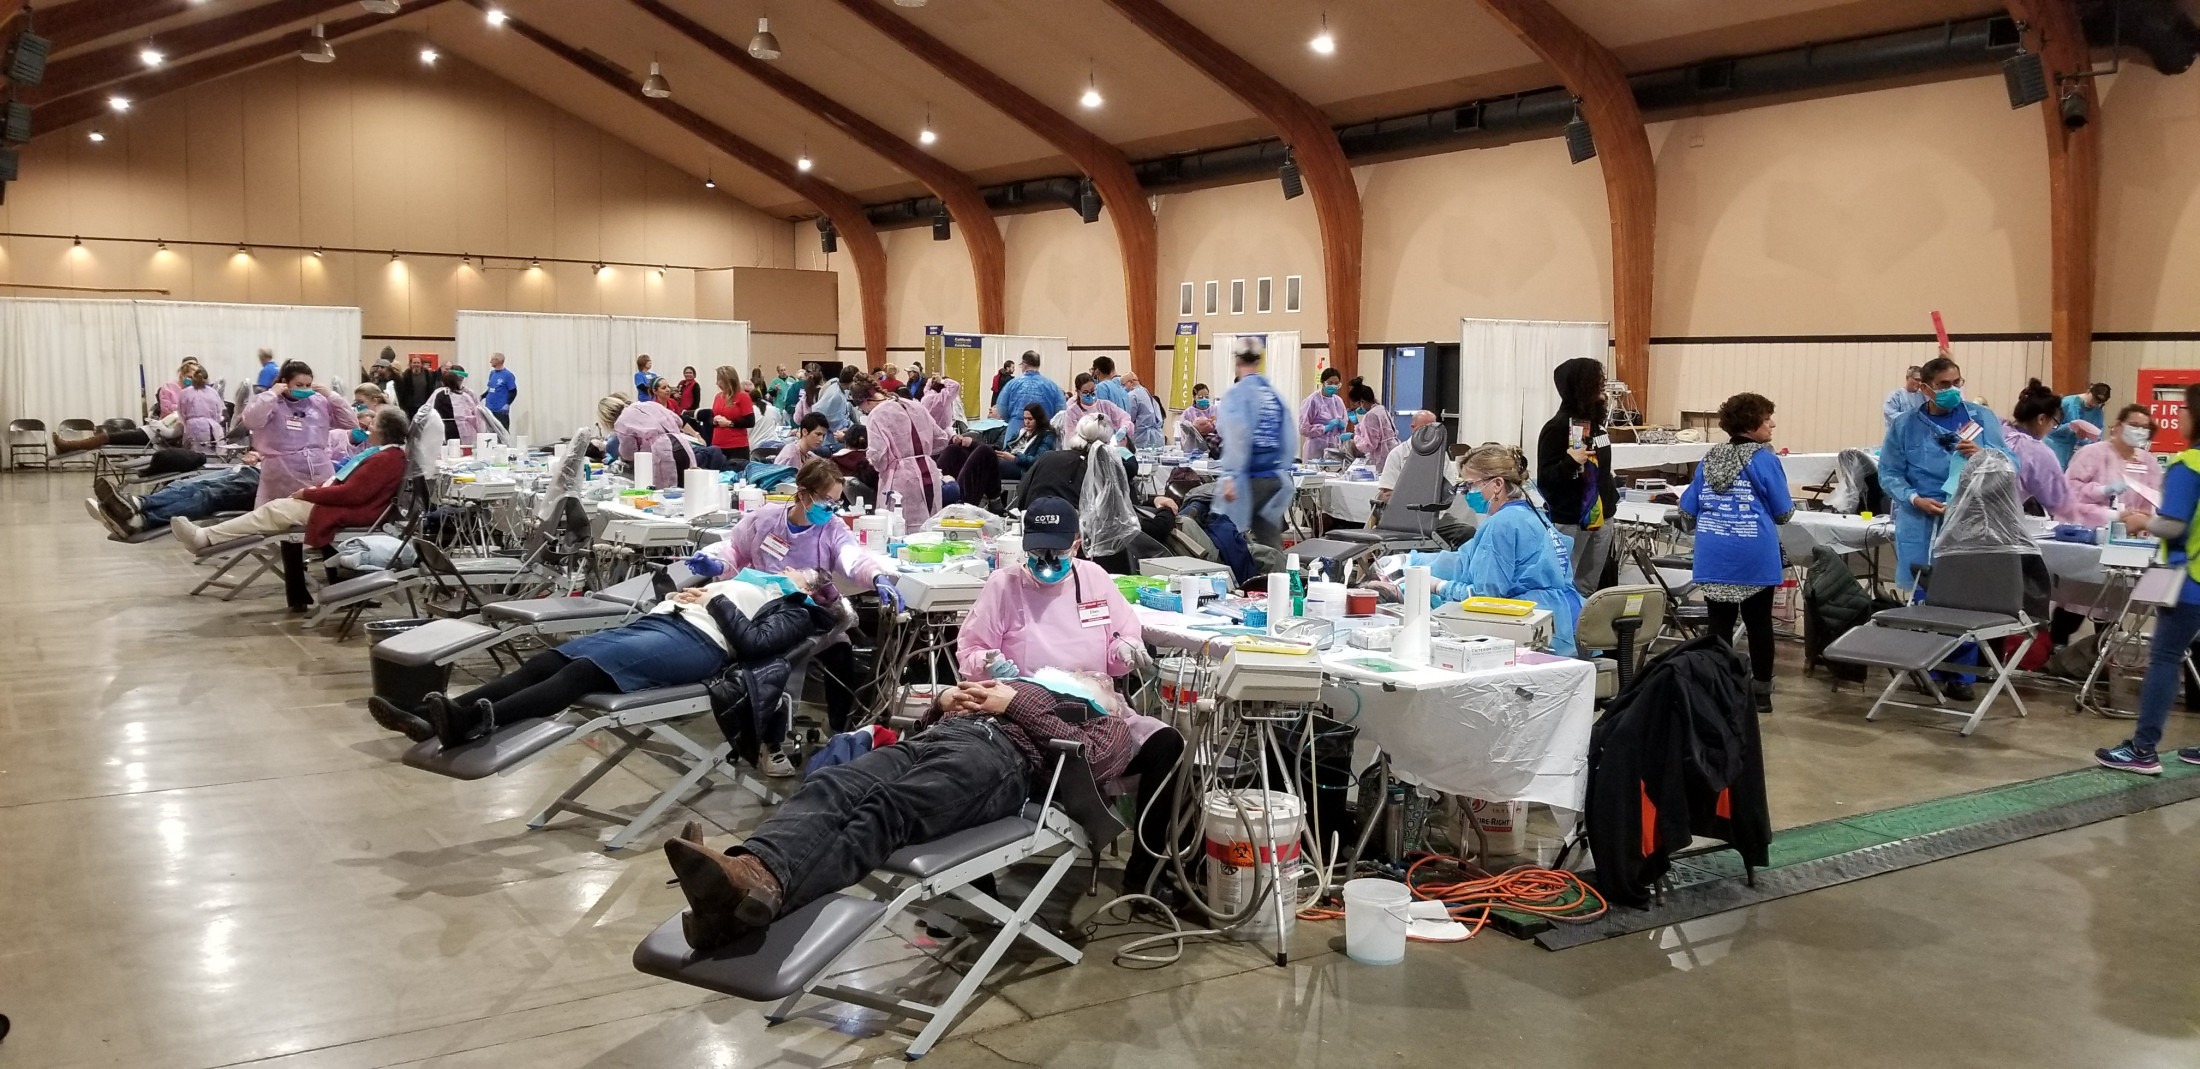 Multiple people receiving dental services during community outreach program